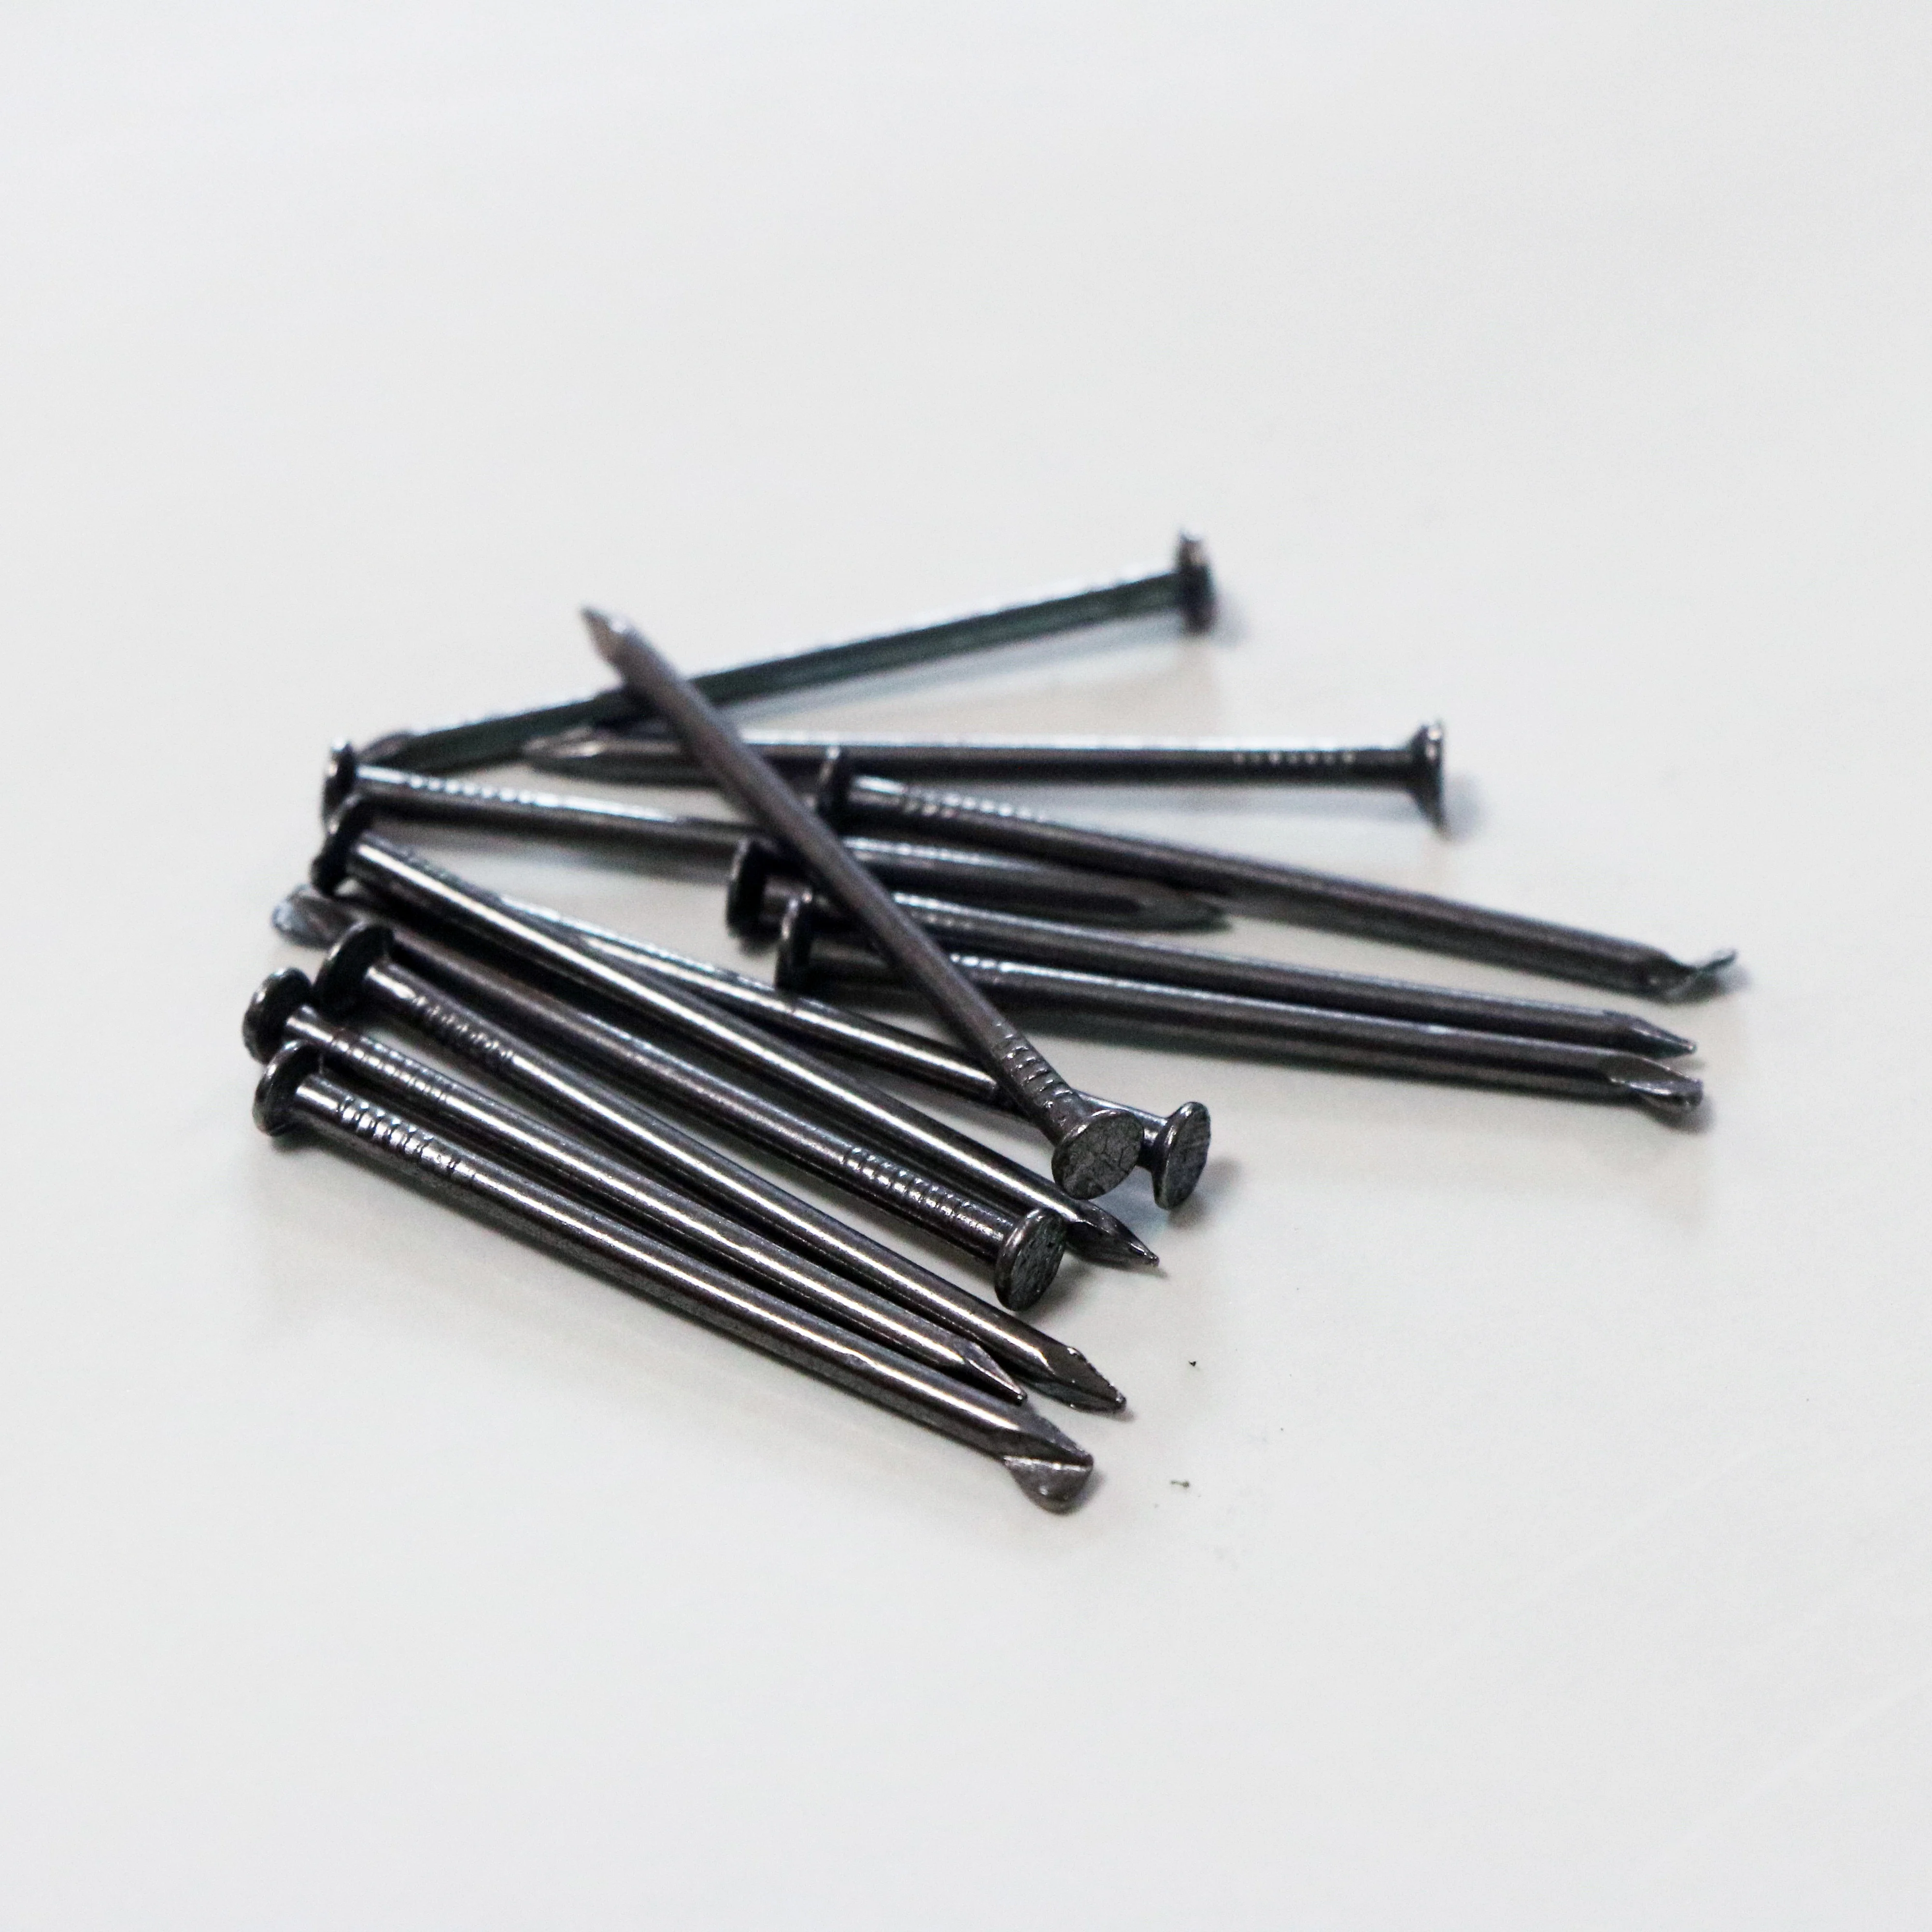 25kg Iron Nails In Bulk High Quality Common Iron Nails Polishing And  Galvanized Wood Nails Cheap Price - Buy Common Iron Nails,Cheap Price Iron  Nails,Commmon Wire Nails Product on 